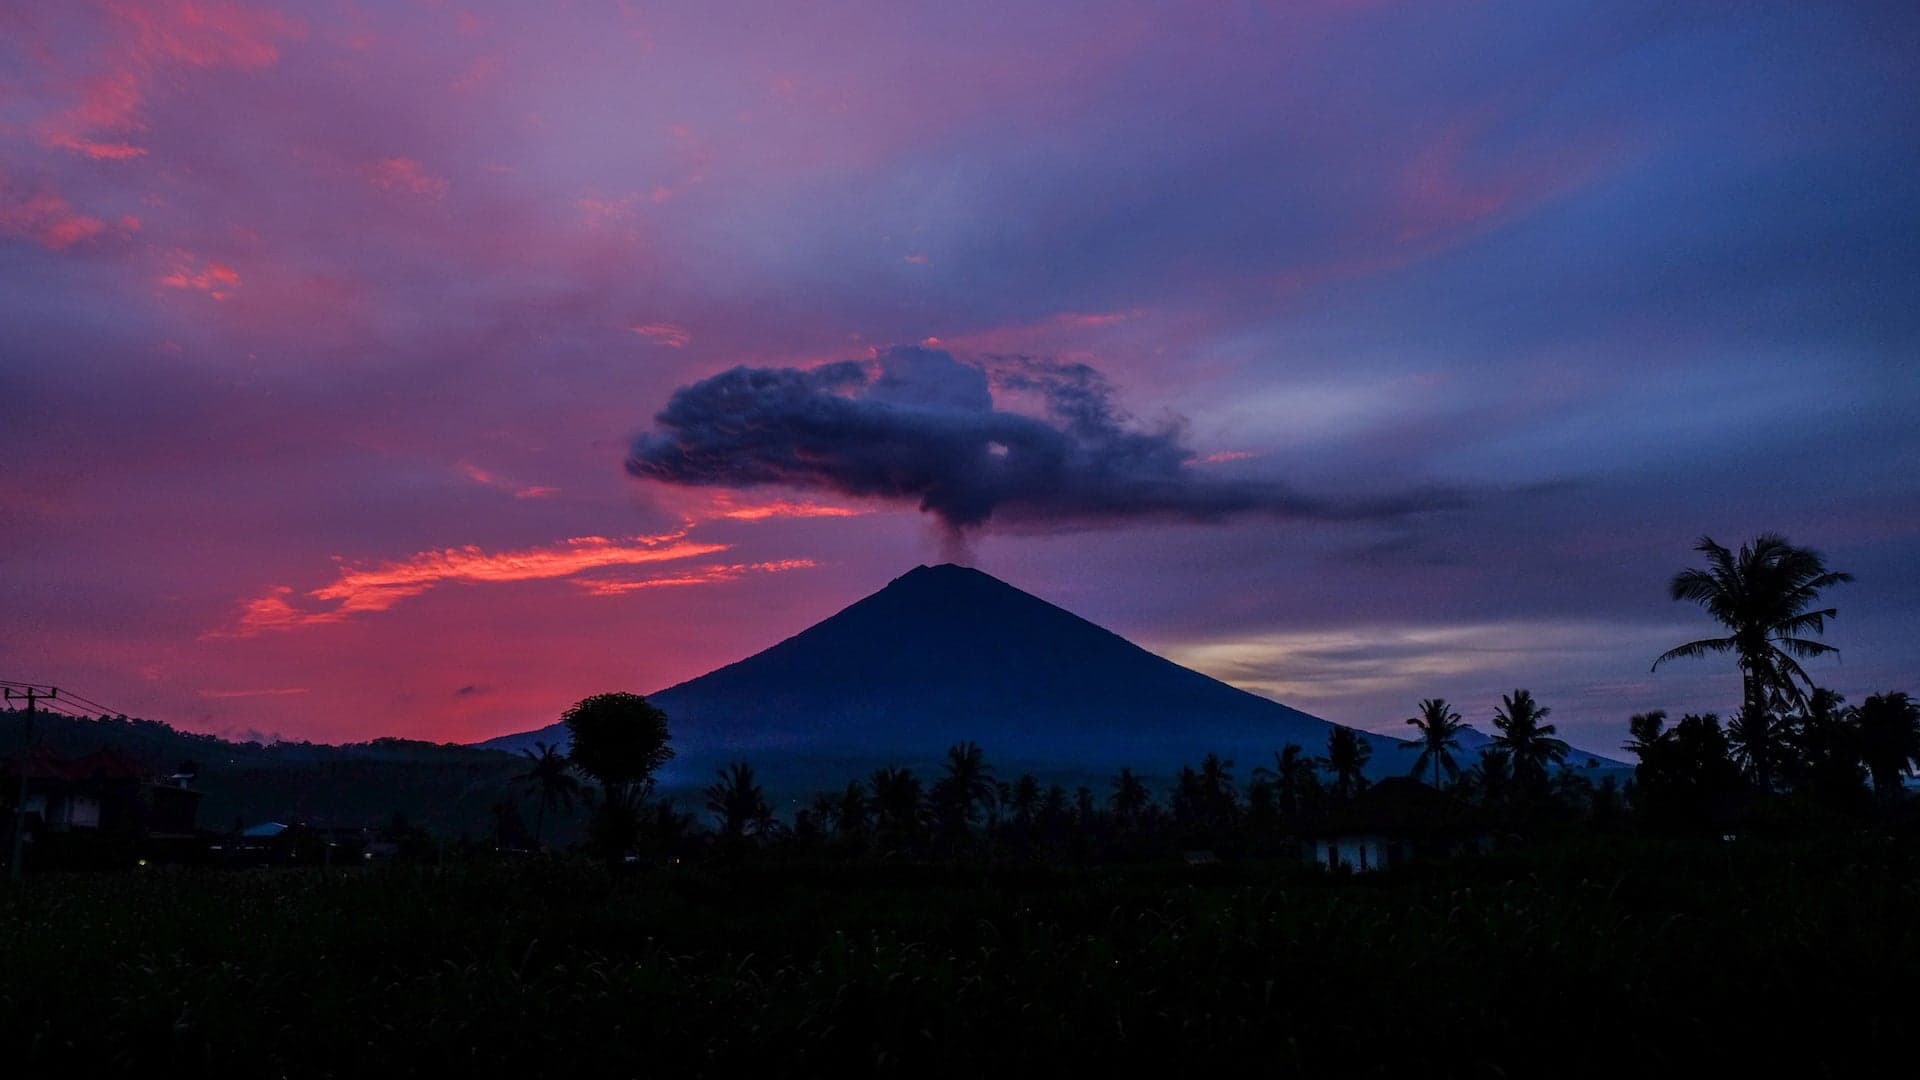 Indonesian Volcanologists Lost Gas-Sampling Drone to the Elements